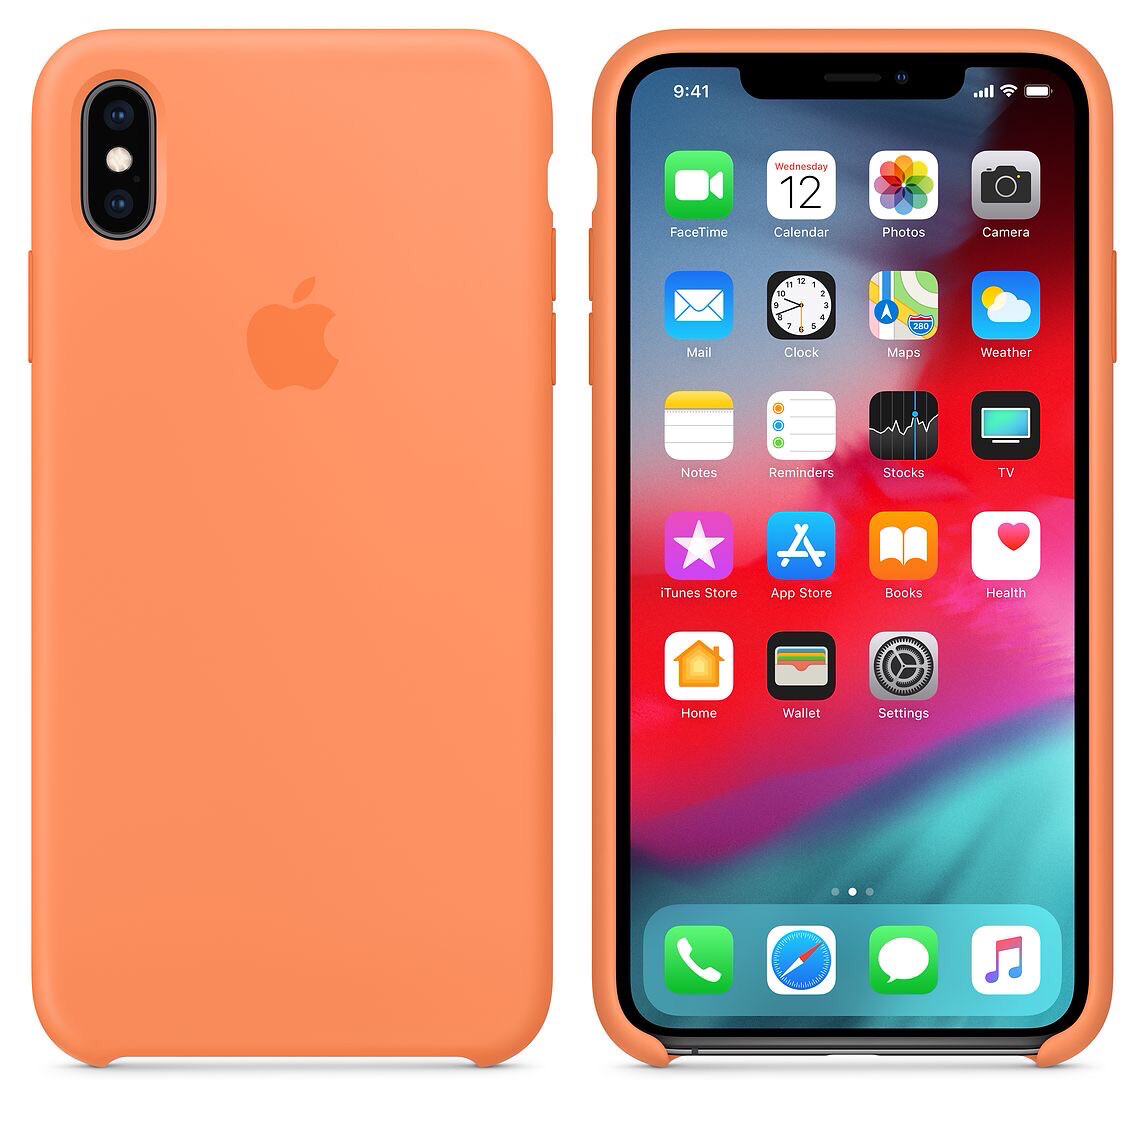 Silicone Case (iPhone X To iPhone 11 Pro Max )